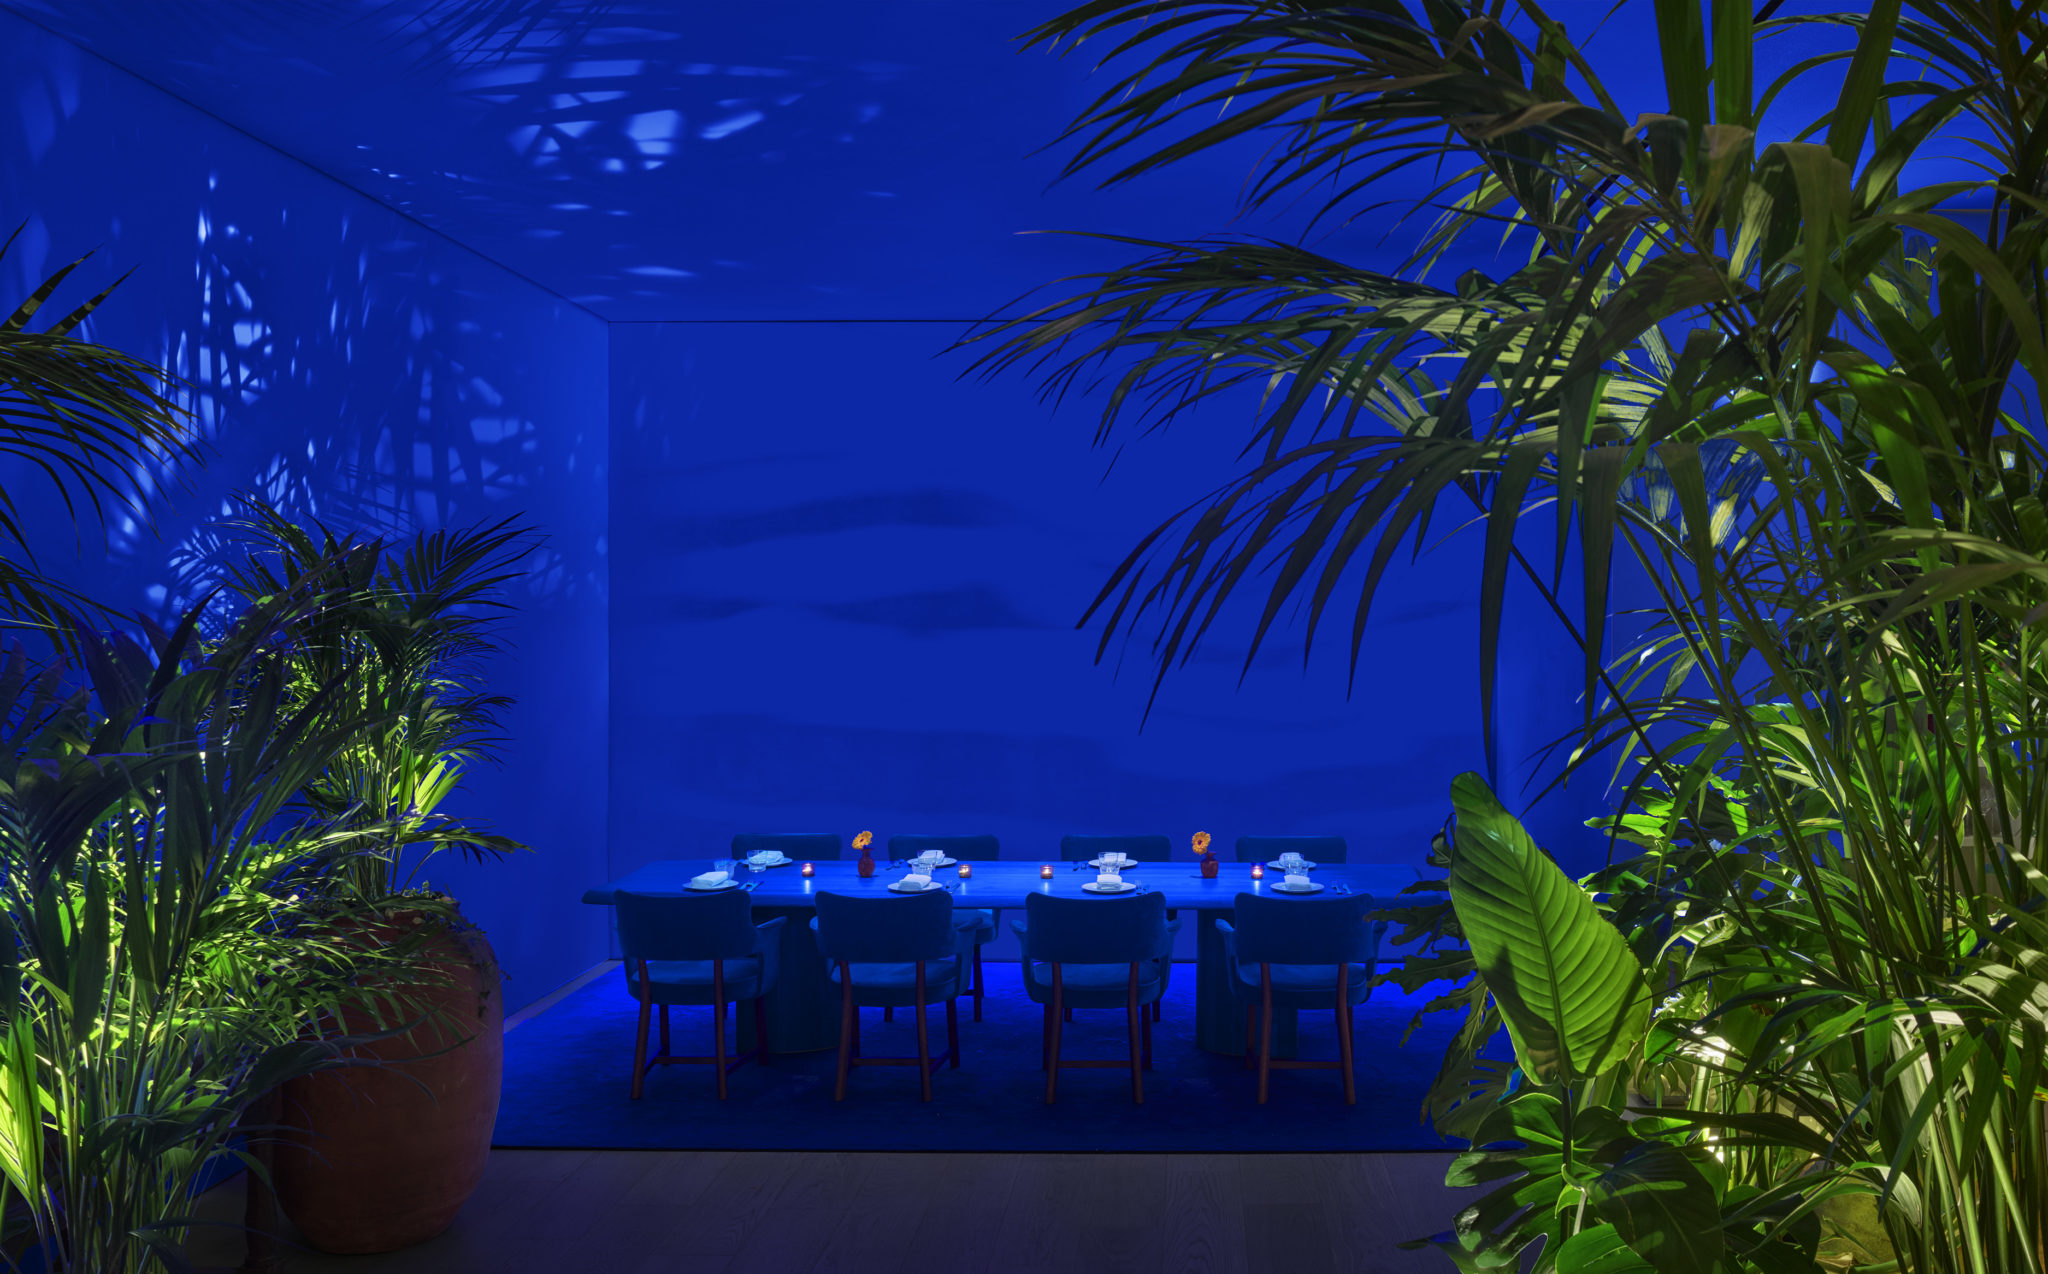 Private dining room lit with blue light and tropical decor